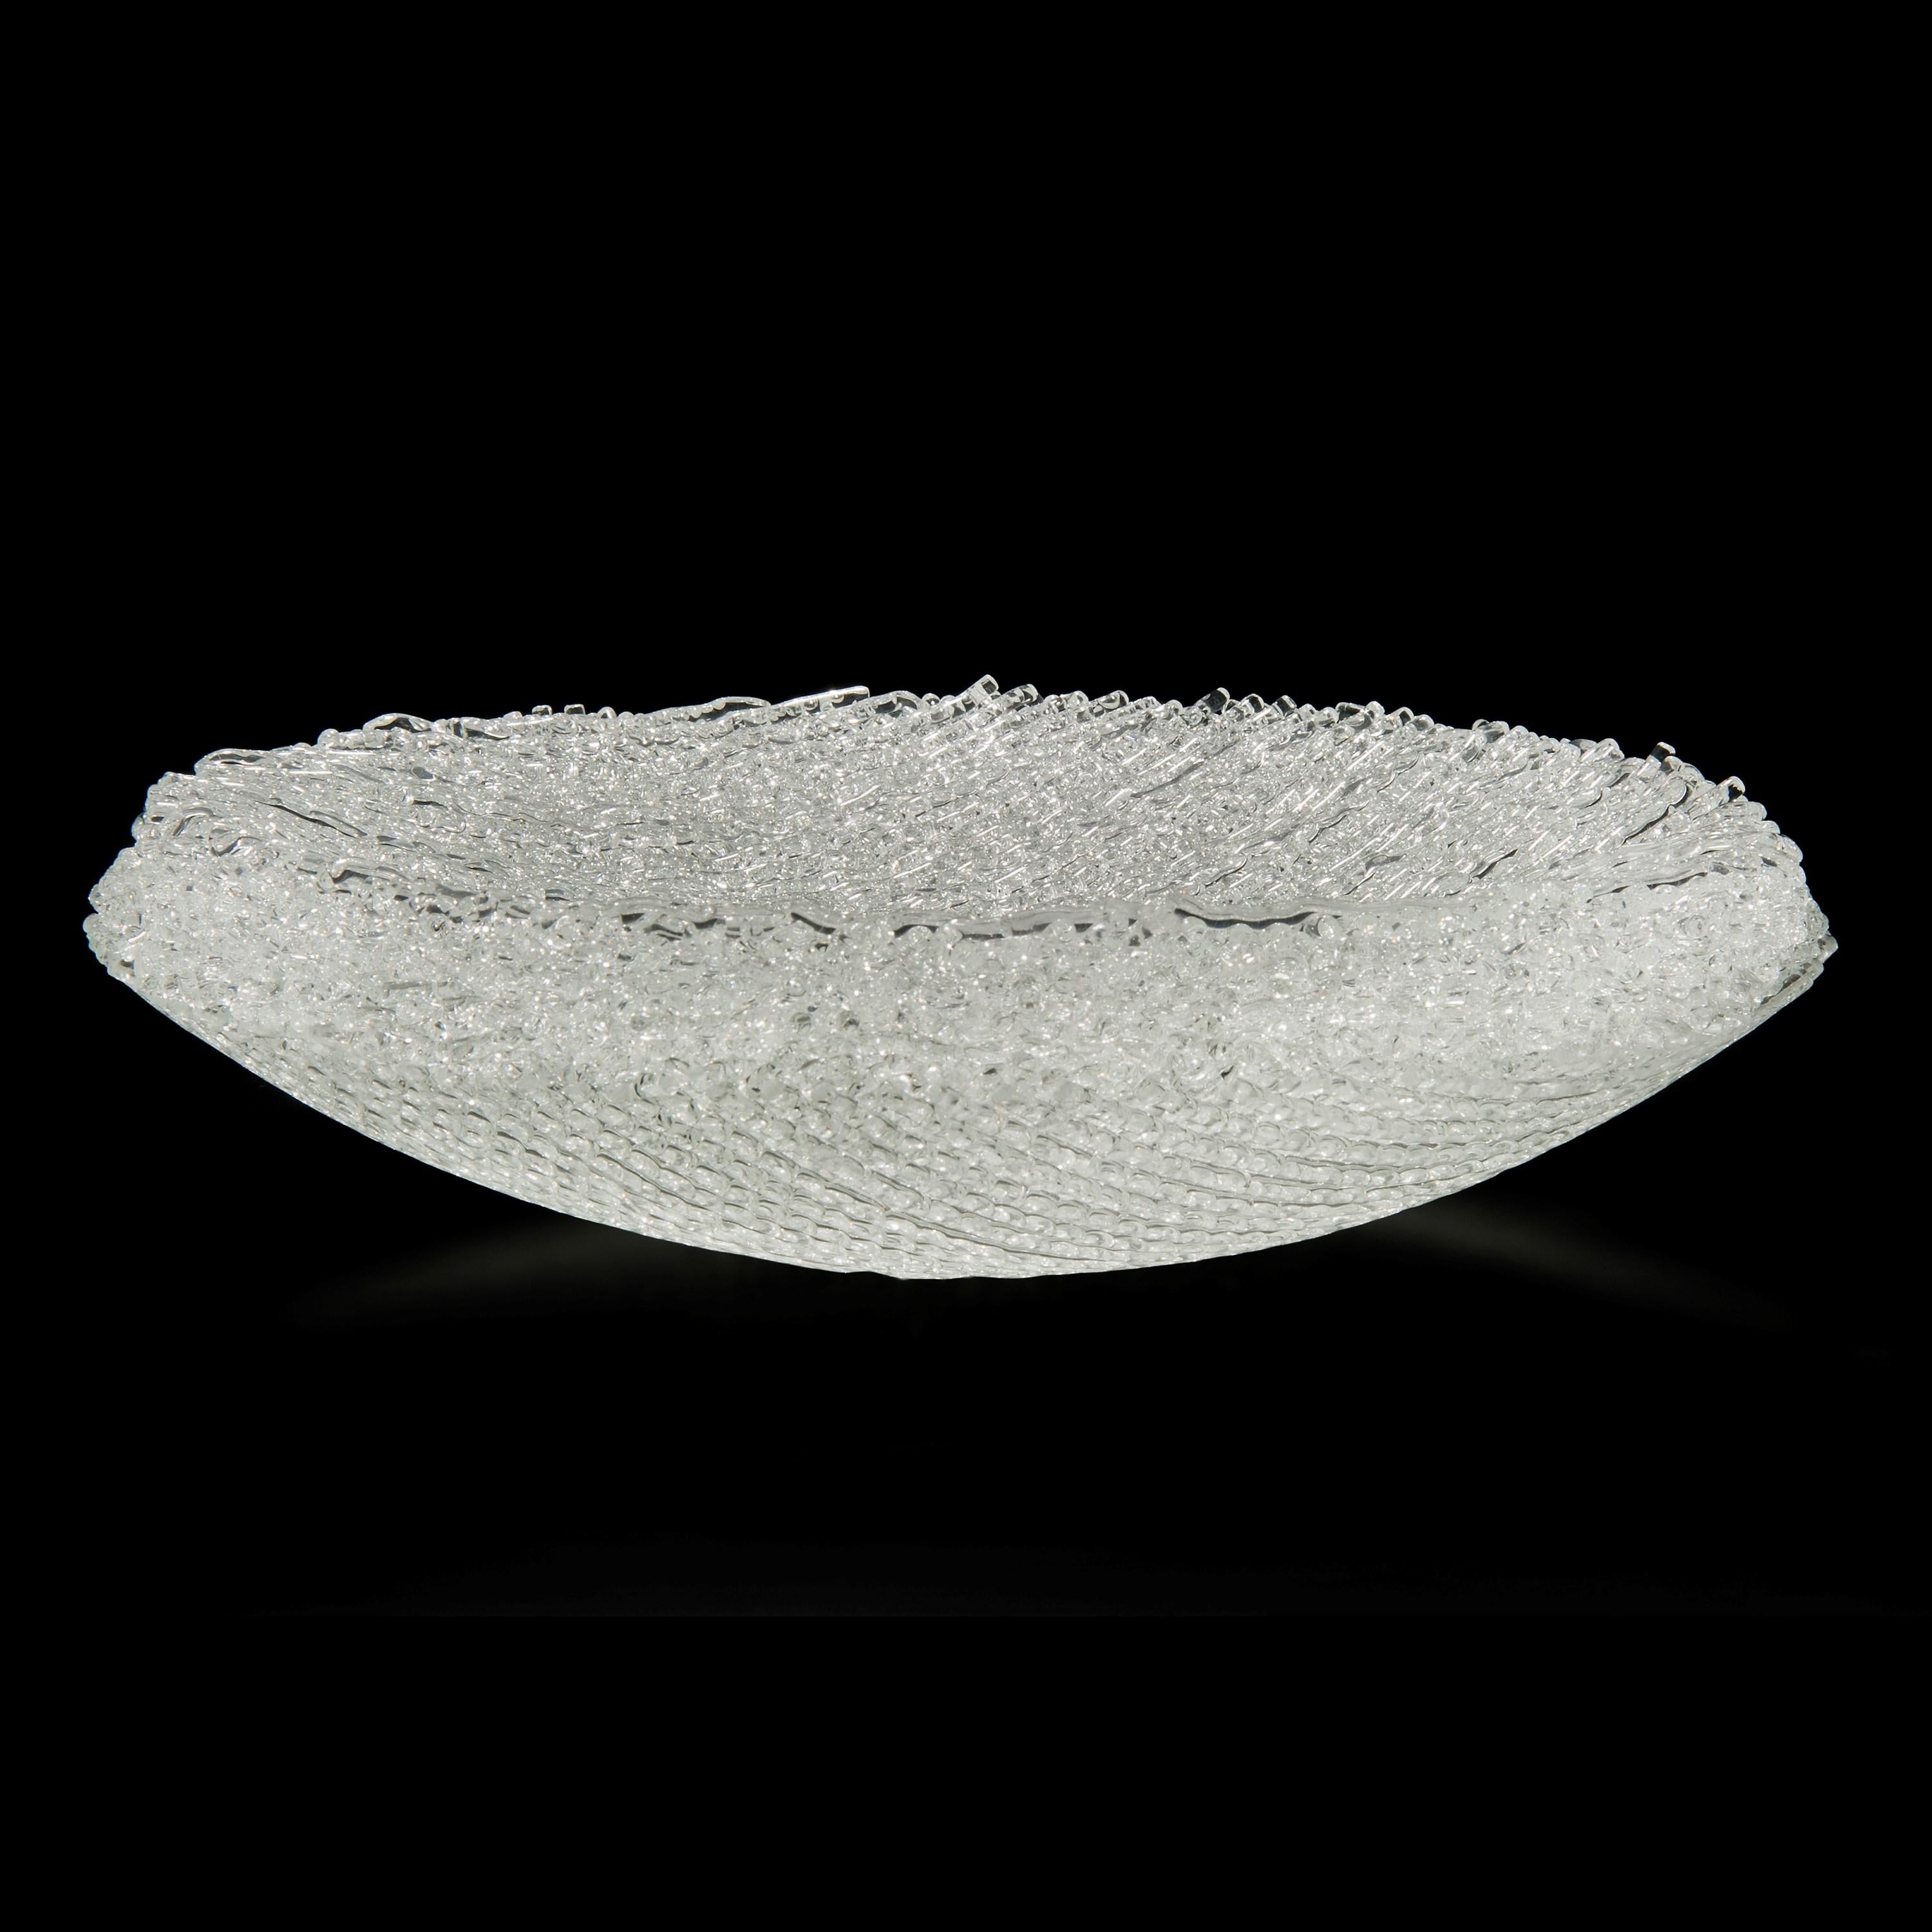  Enceladus, Unique Woven Clear Glass Sculptural Centrepiece by Cathryn Shilling In New Condition For Sale In London, GB